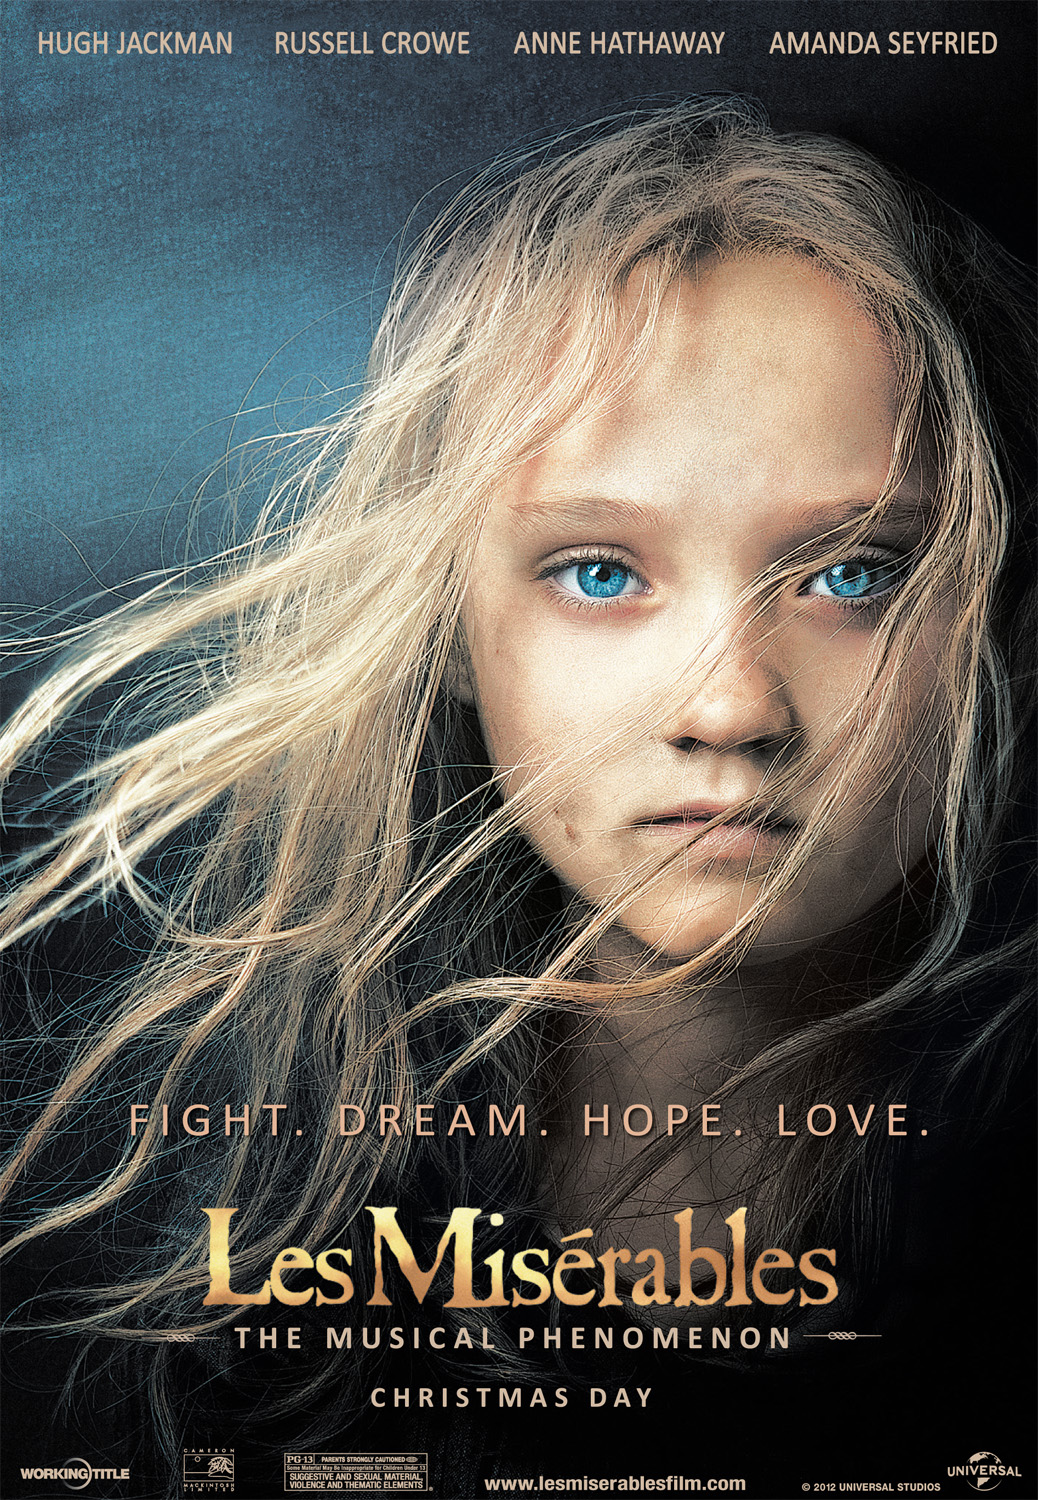 ‘Les Misérables’ Opens December 25! Enter to Win Passes to the St. Louis Advance Screening